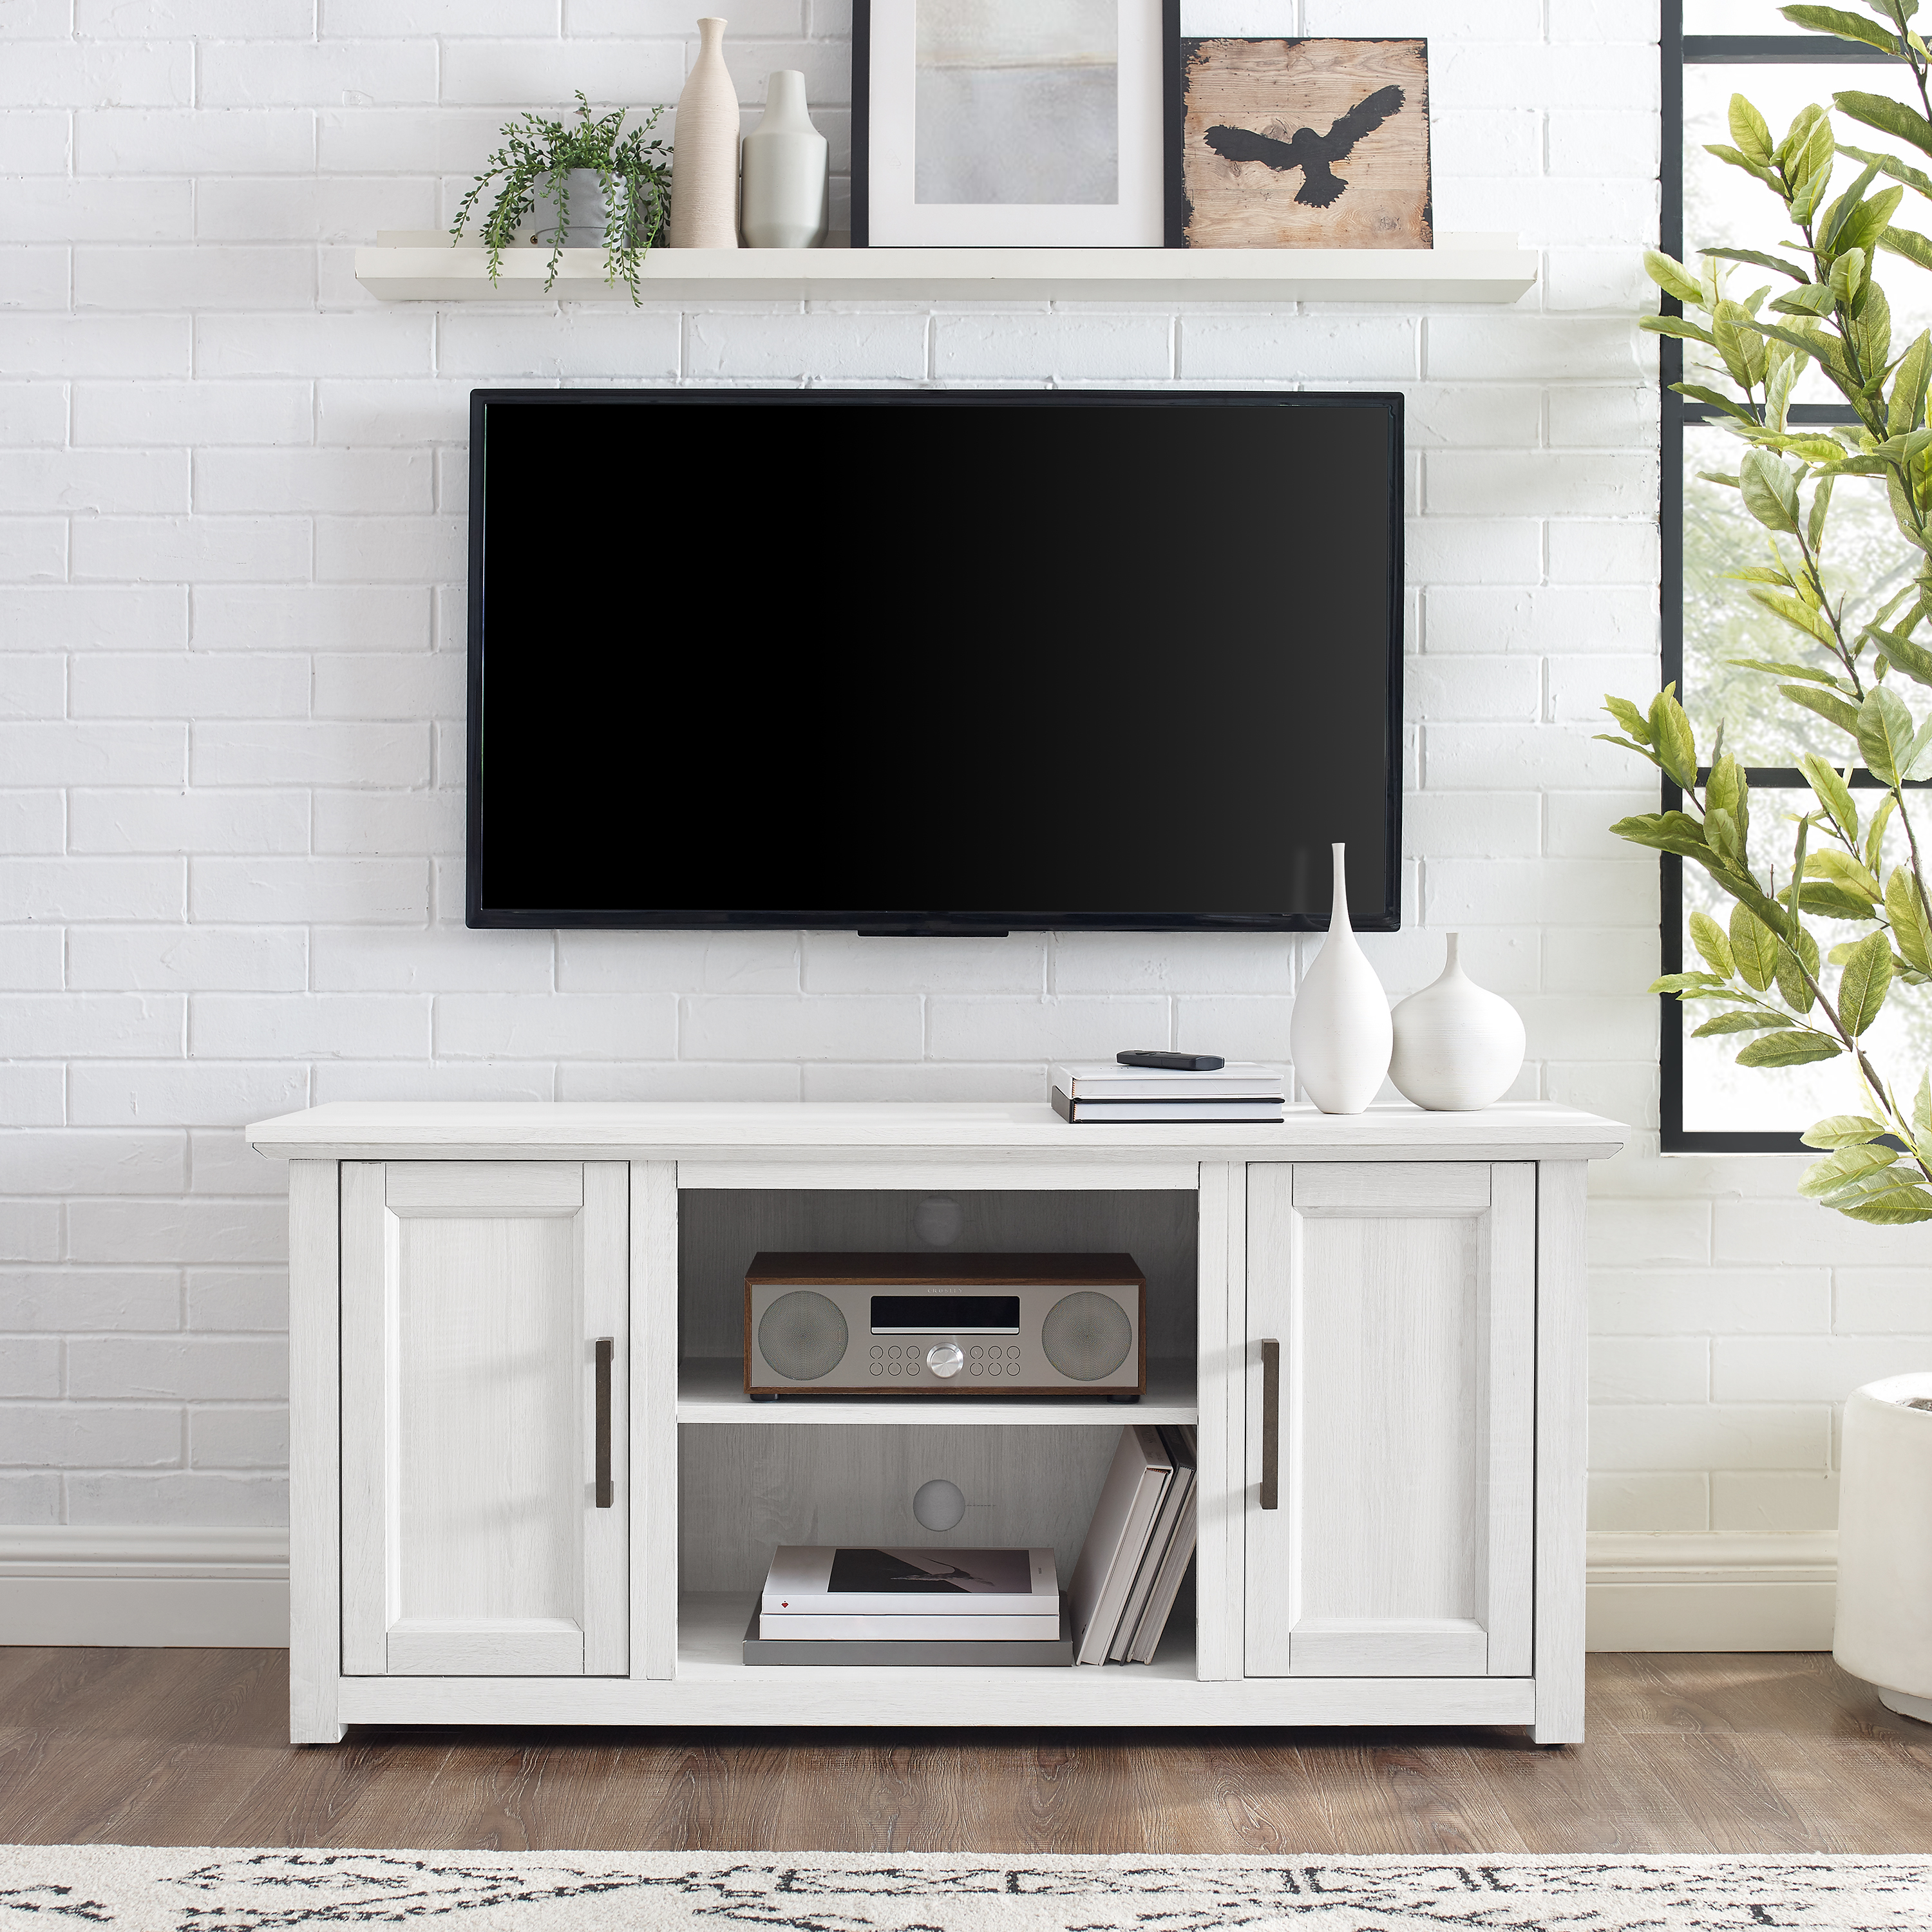 Crosley Camden 48" Rustic Low Profile TV Stand in Whitewash - image 3 of 15